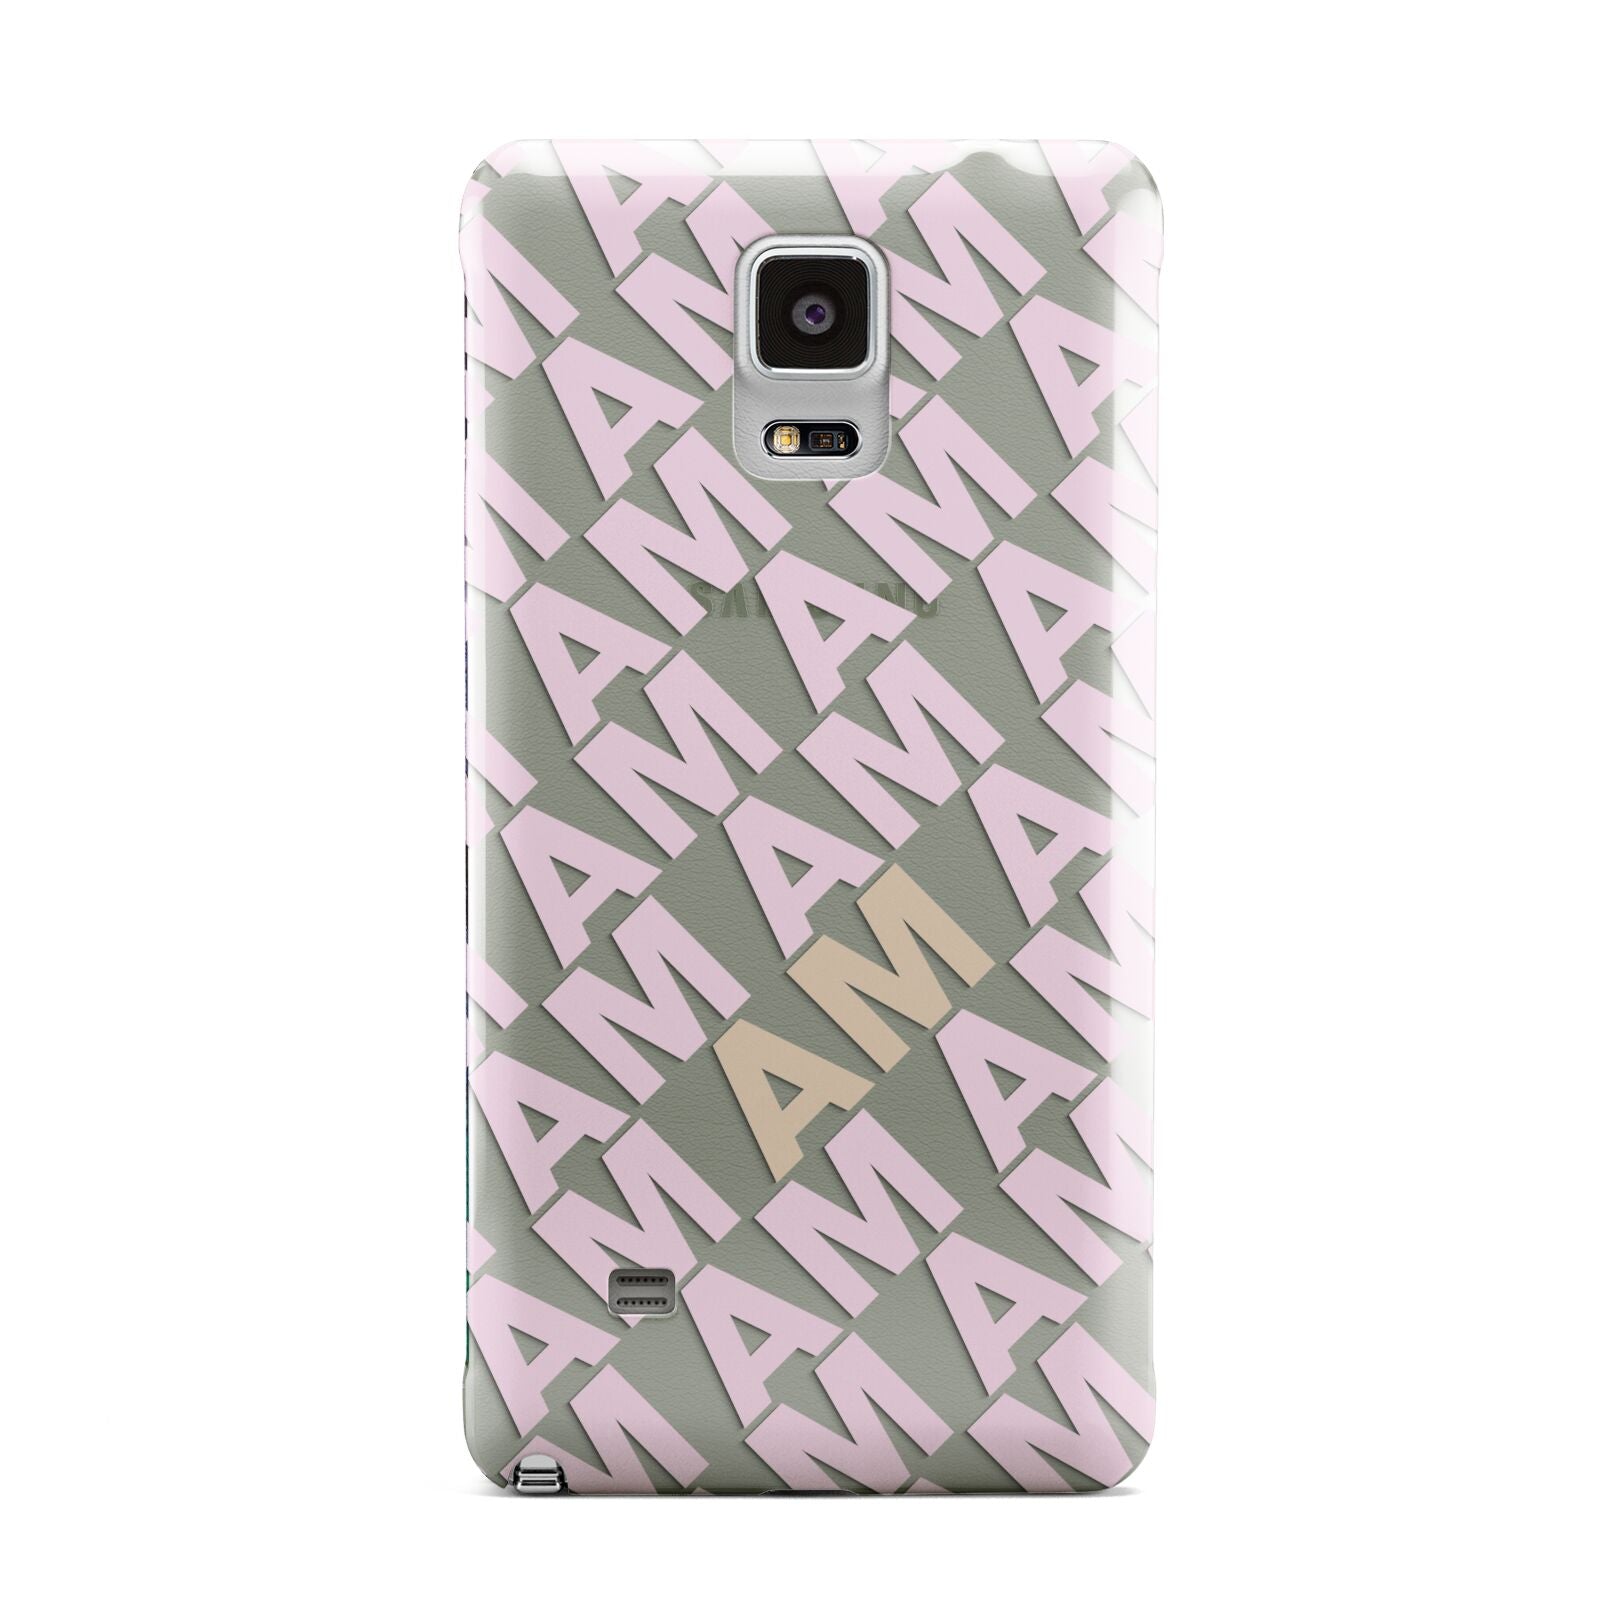 Personalised Diagonal Bold Initials Samsung Galaxy Note 4 Case